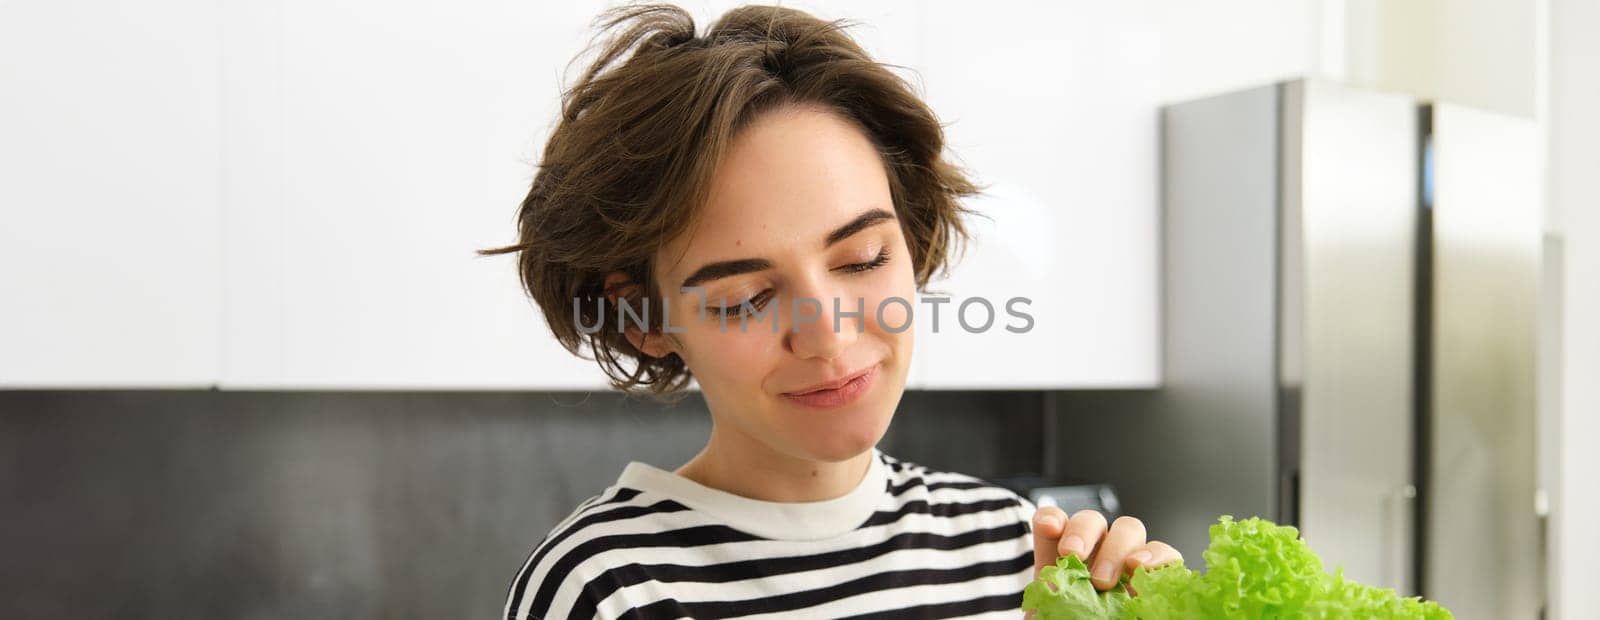 Close up portrait of smiling, beautiful female model, making a salad, holding green lettuce leaf, preparing vegetables, cooking in the kitchen, standing in striped t-shirt.